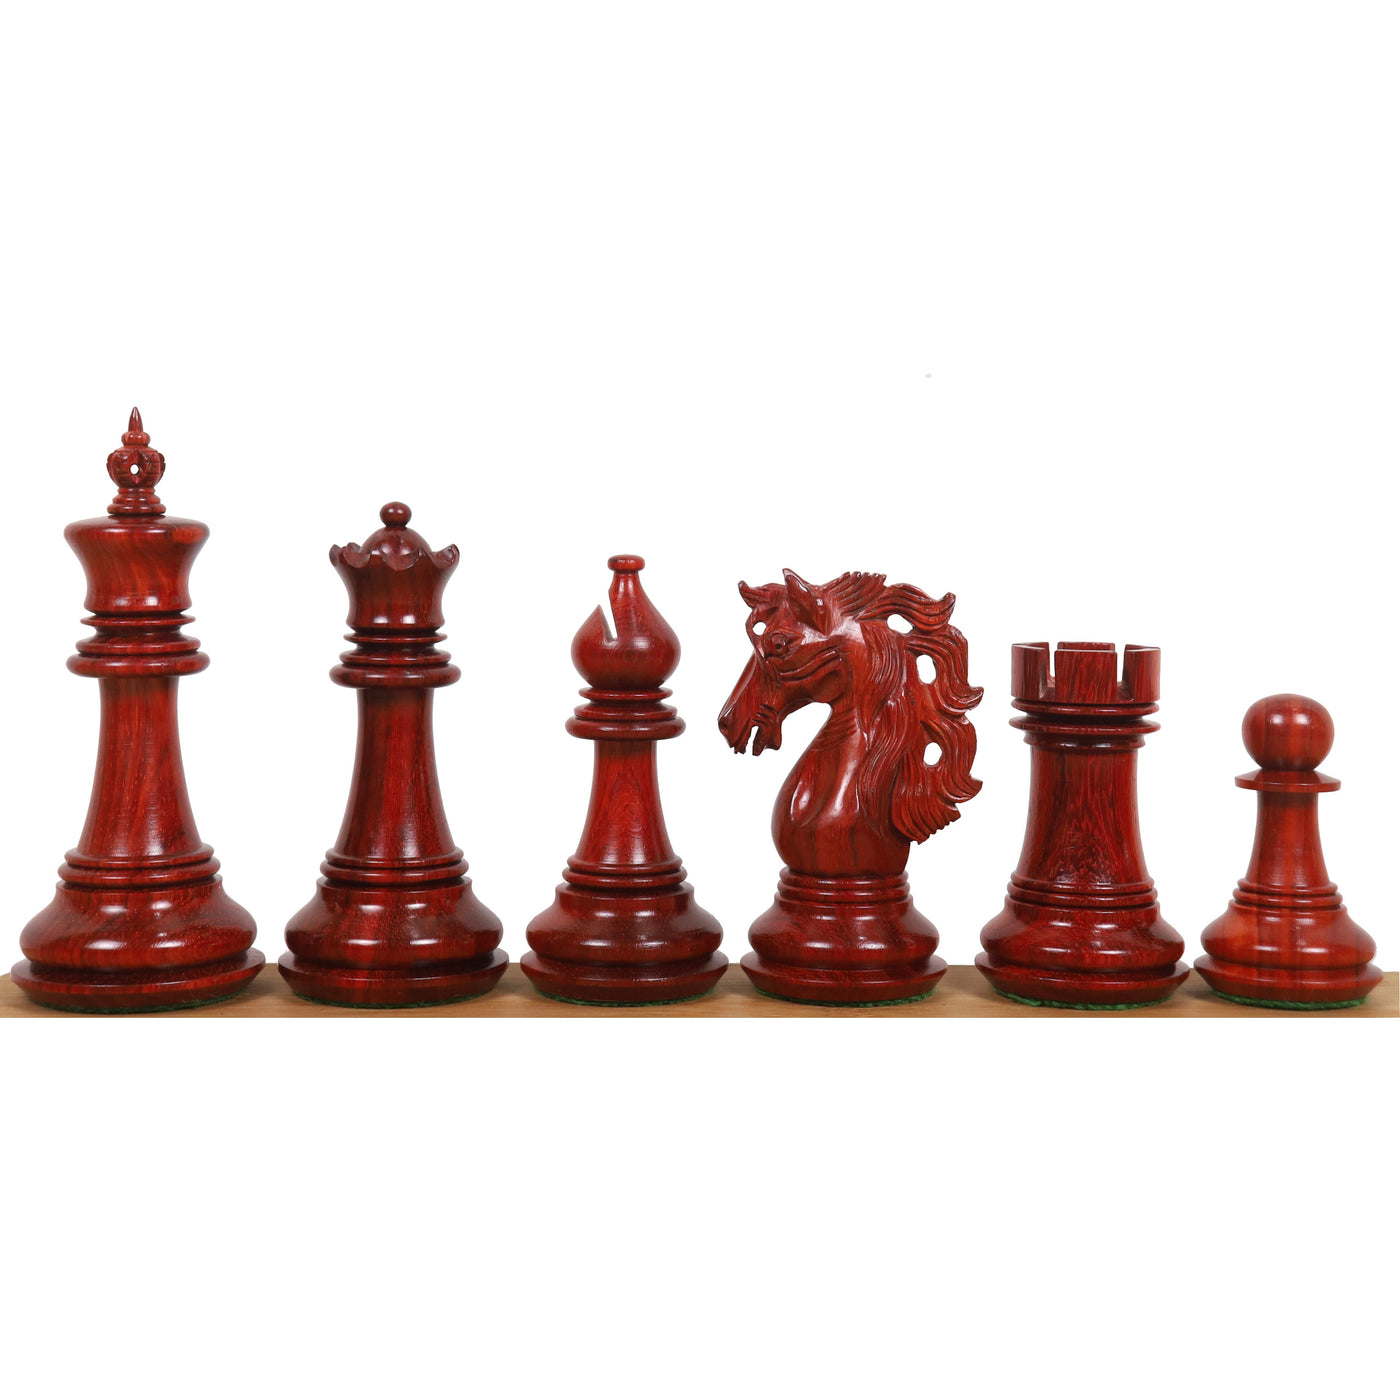 4.6" Spartacus Luxury Staunton Bud Rosewood Chess Pieces with 23" Bud Rosewood & Maple Wood Signature Wooden Chessboard and Leatherette Coffer Storage Box